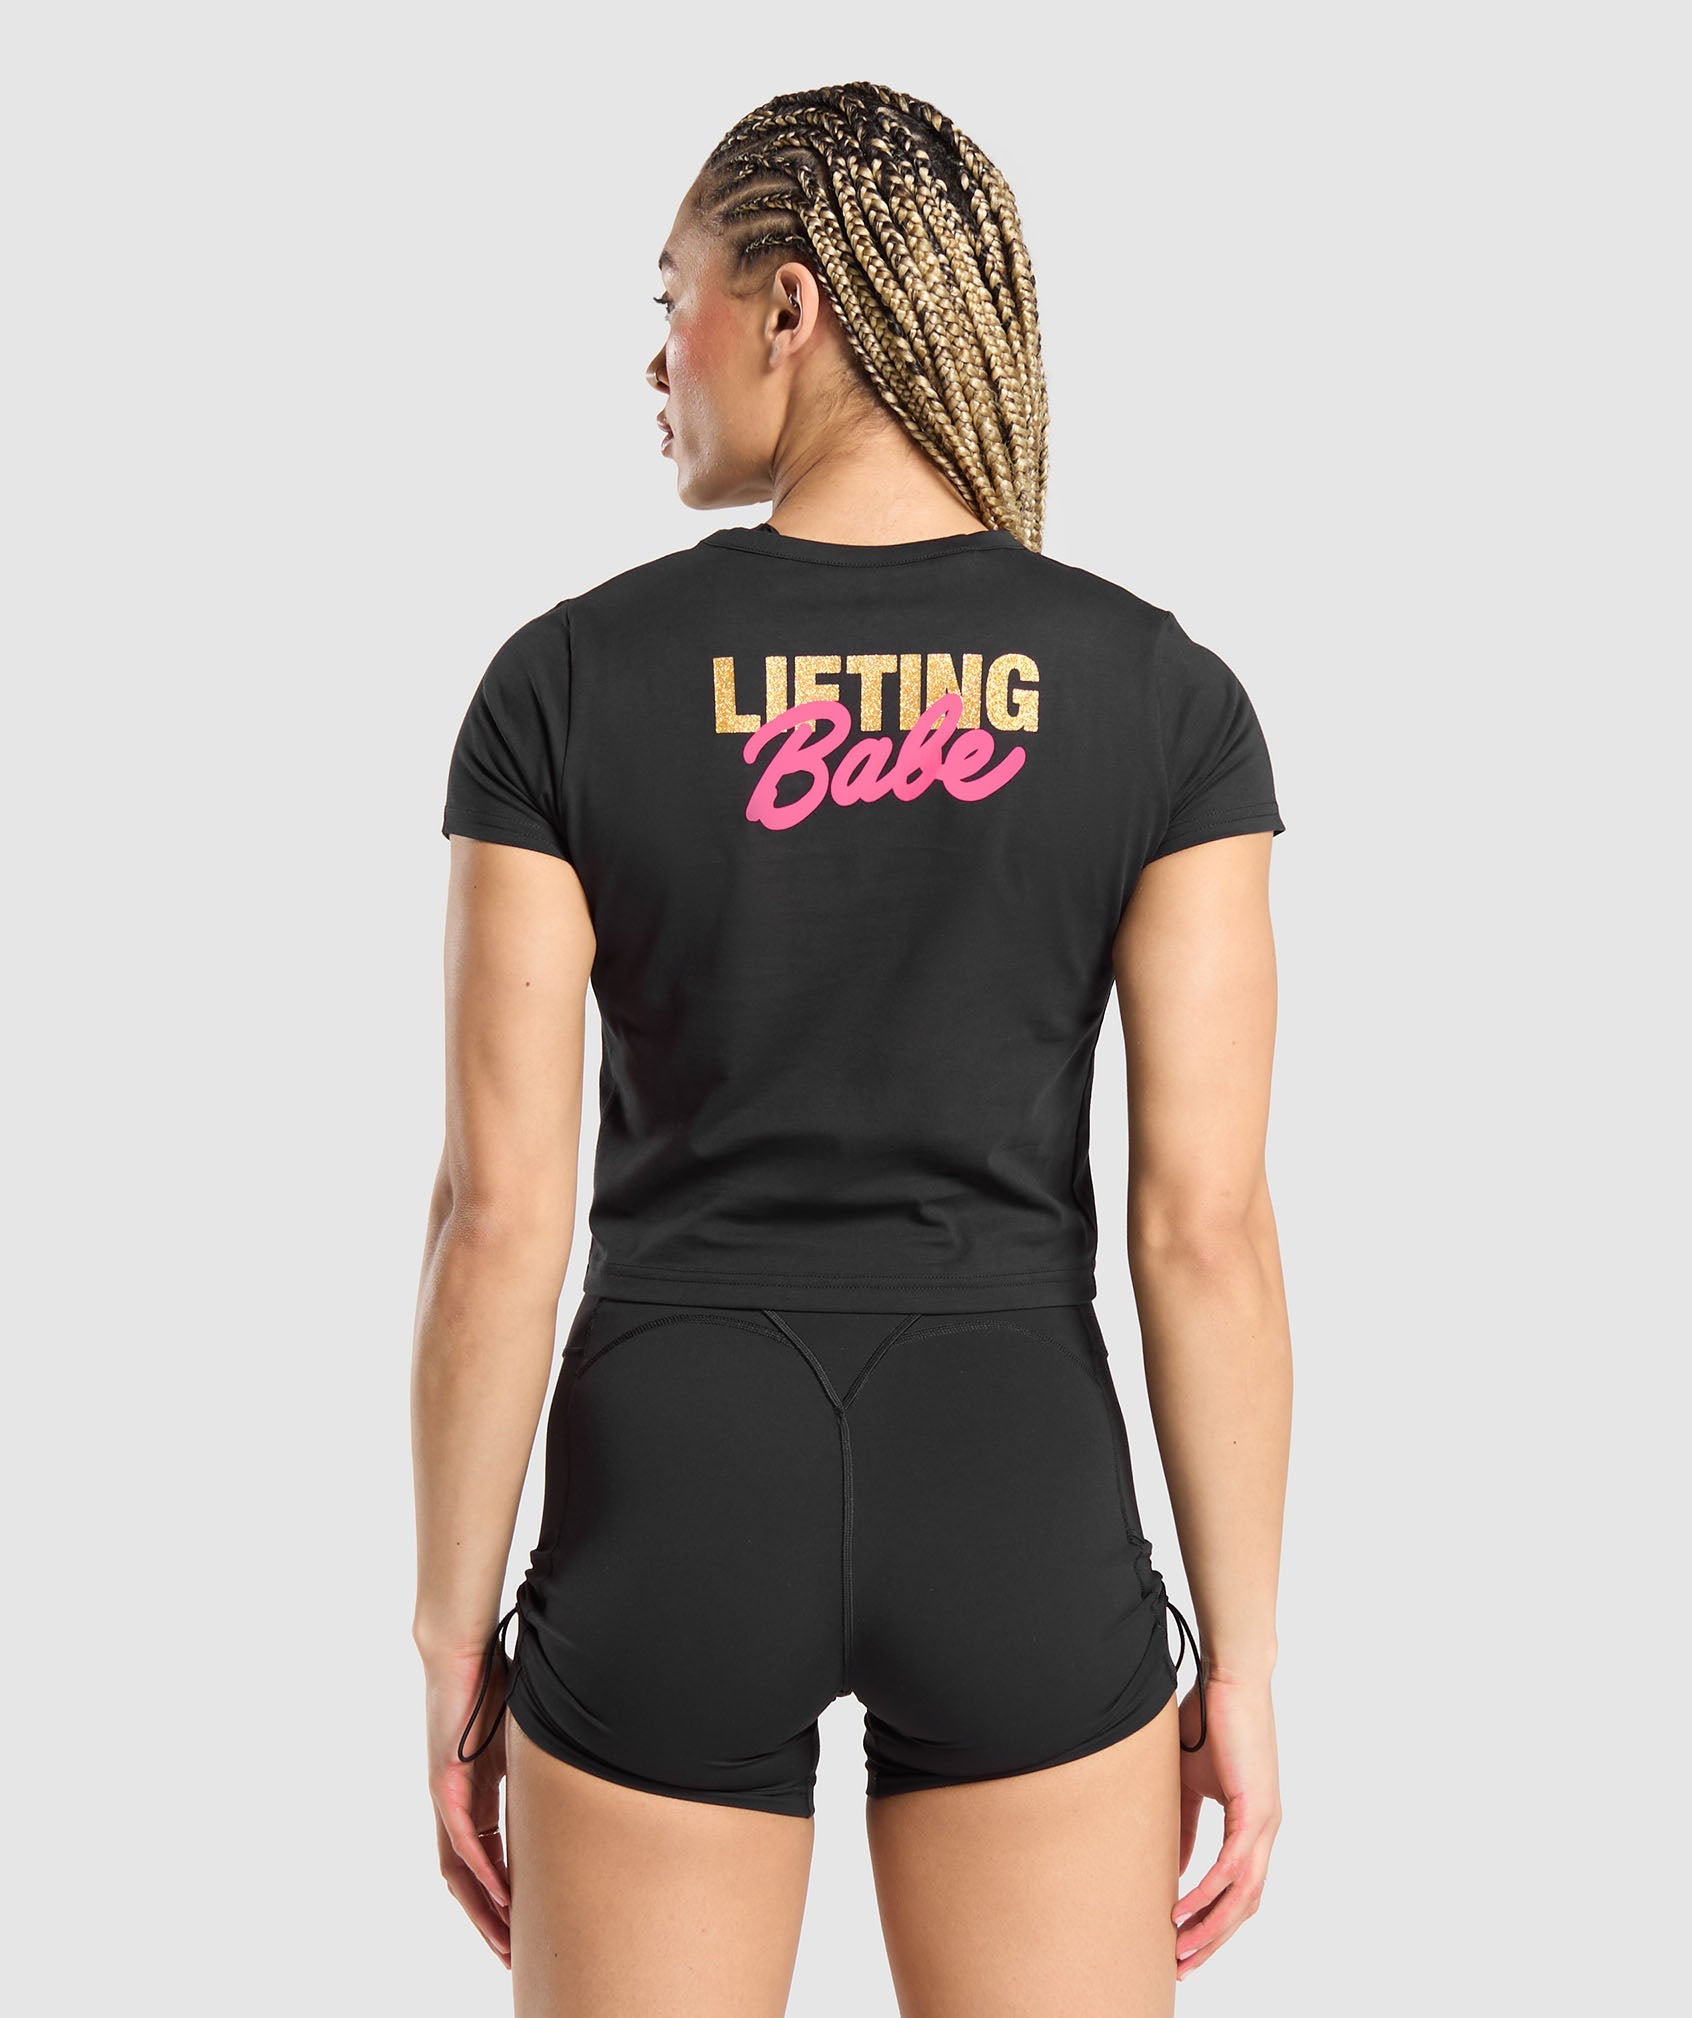 Lifting Babe Tee in Black